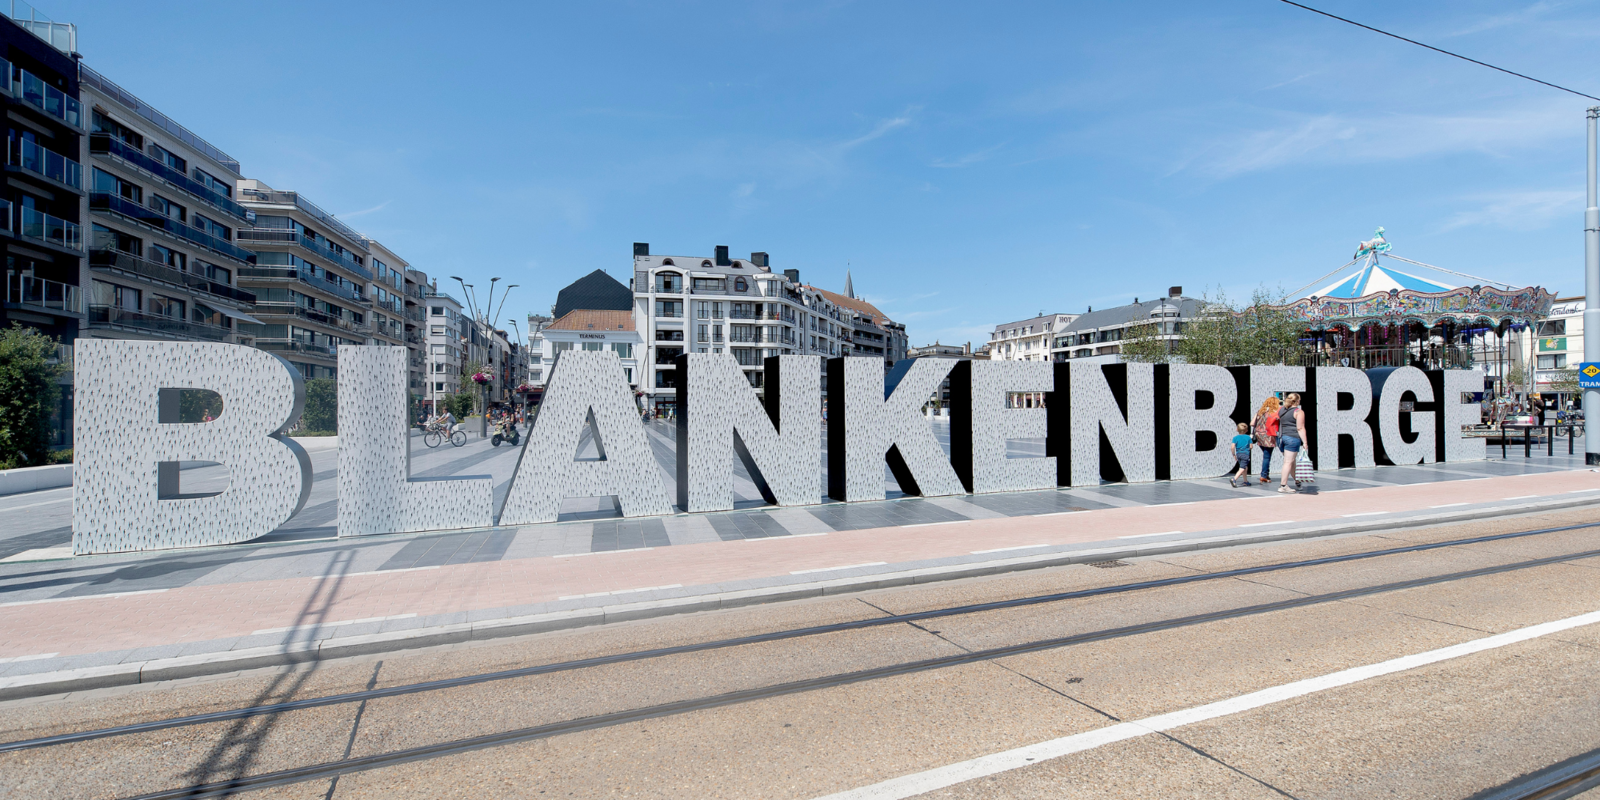 Explore Blankenberge with a guide